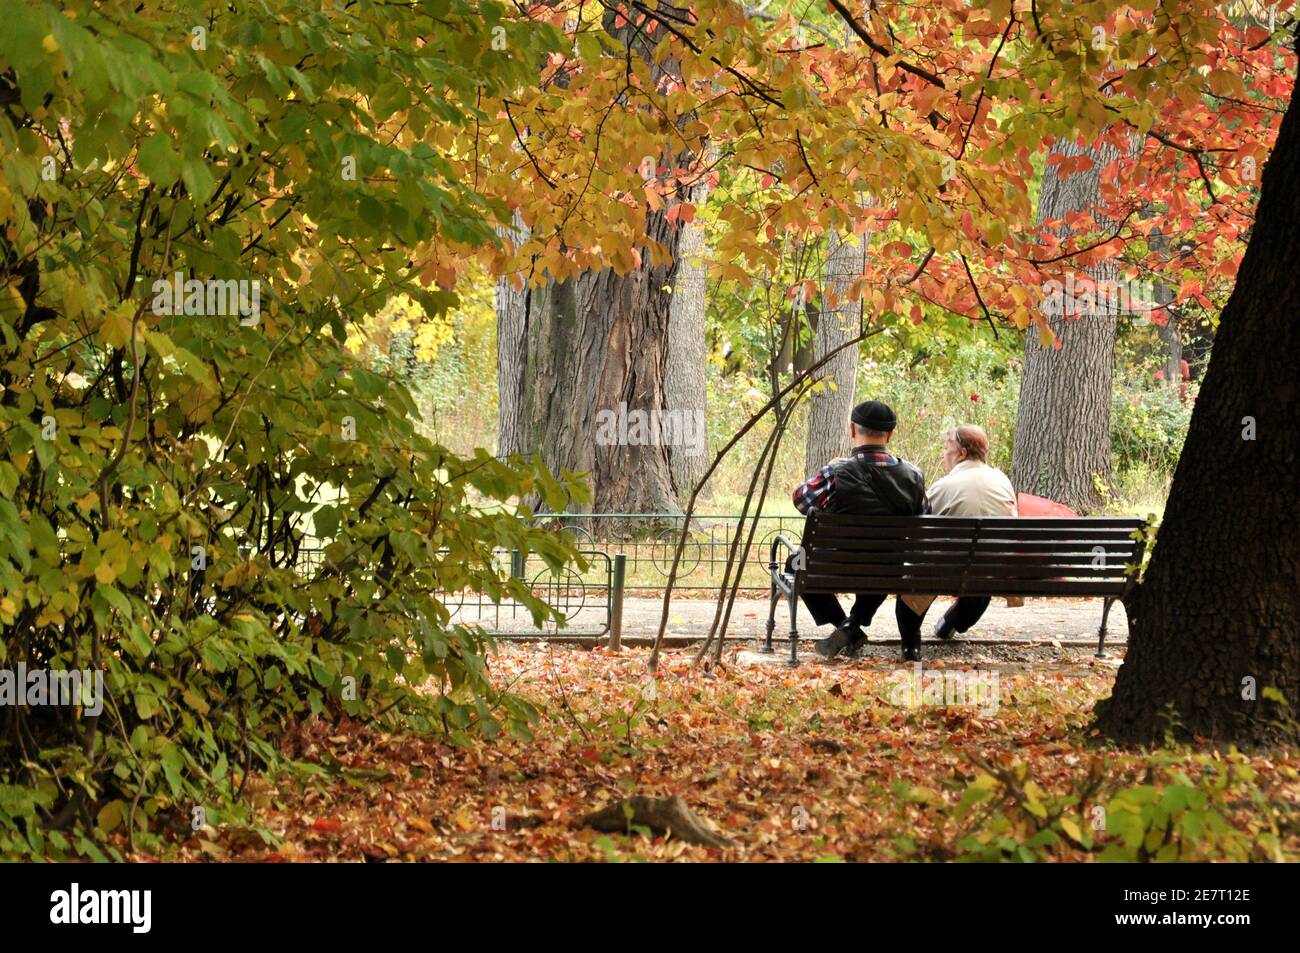 Bucharest, Romania - October 28, 2018: a couple of old man and women siting on a bench with the back, in a beautiful colored autumn day in the park Stock Photo